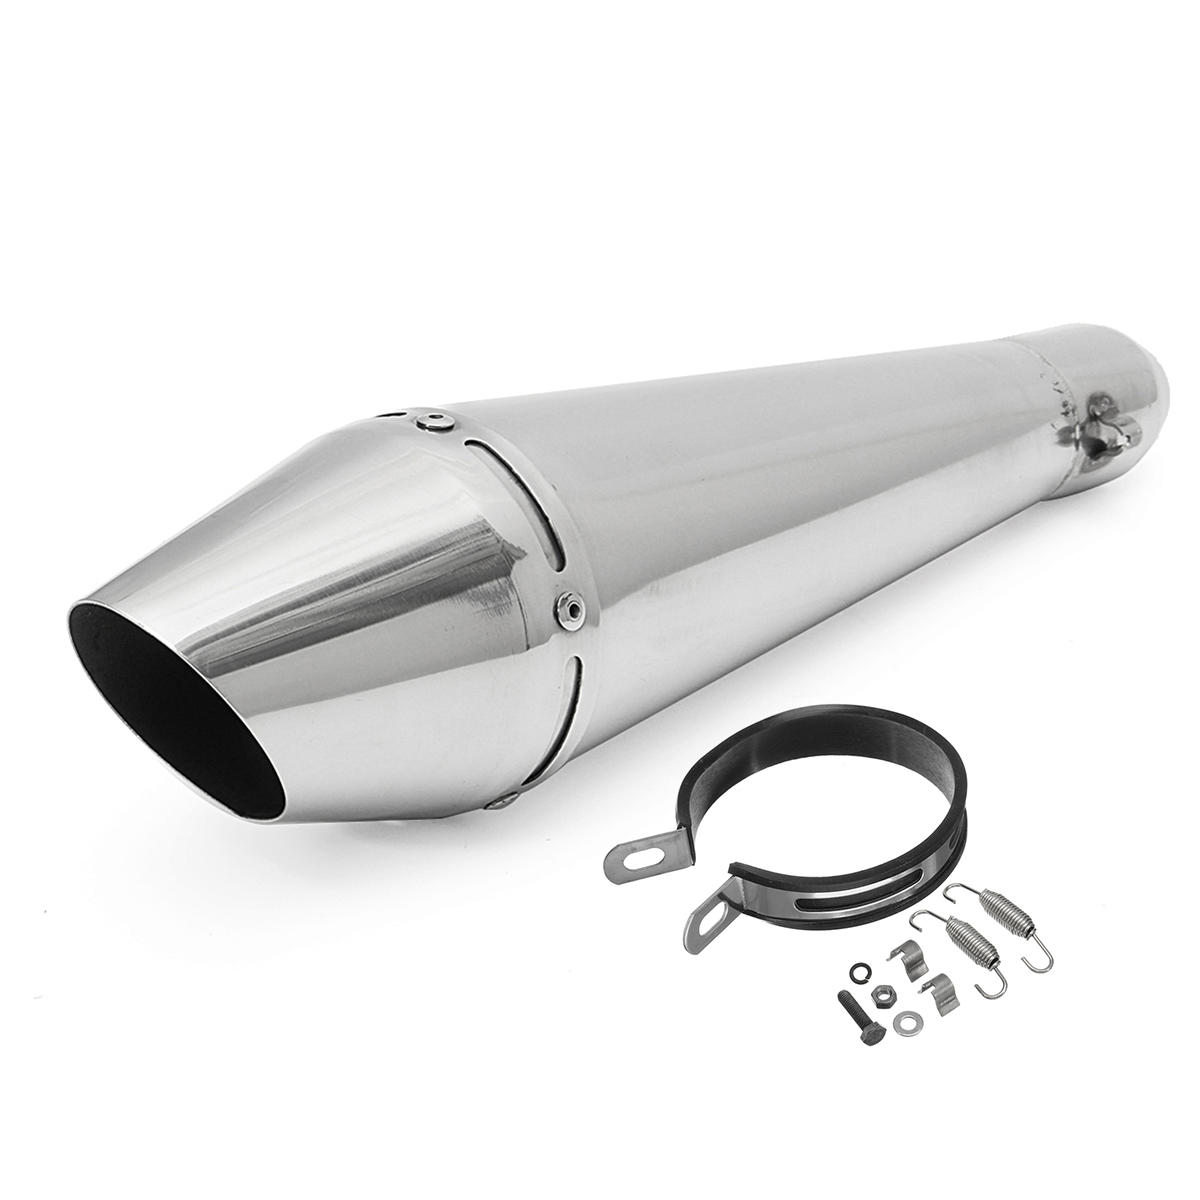 Universal 38-51mm Motorcycle Scooter Exhaust Muffler Pipe W//Silencer Slip On ATV